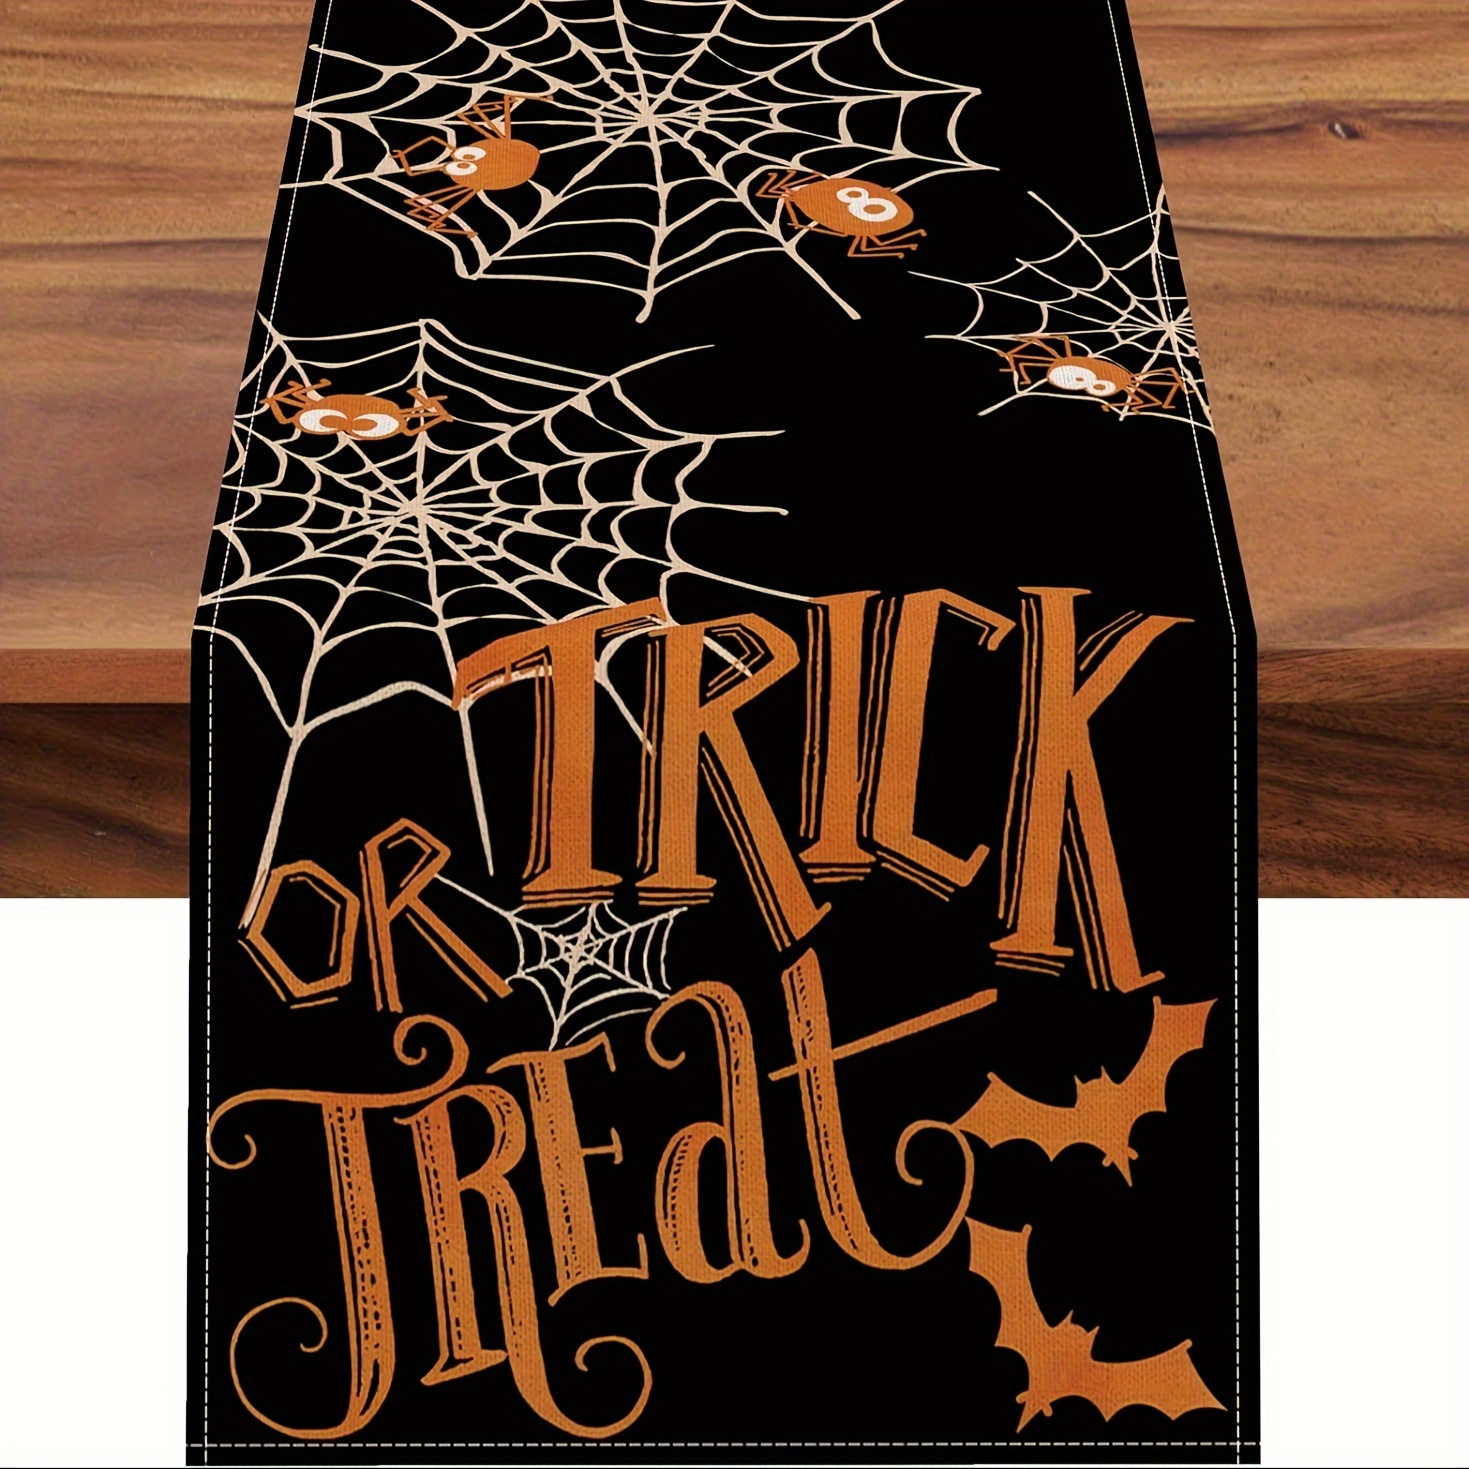 

1pc, Table Runner, Burlap Halloween Theme Table Runner, Trick Or Treat & Spider Web Design, Home Decor For Indoor & Outdoor Dining, Festive Holiday Party Decoration